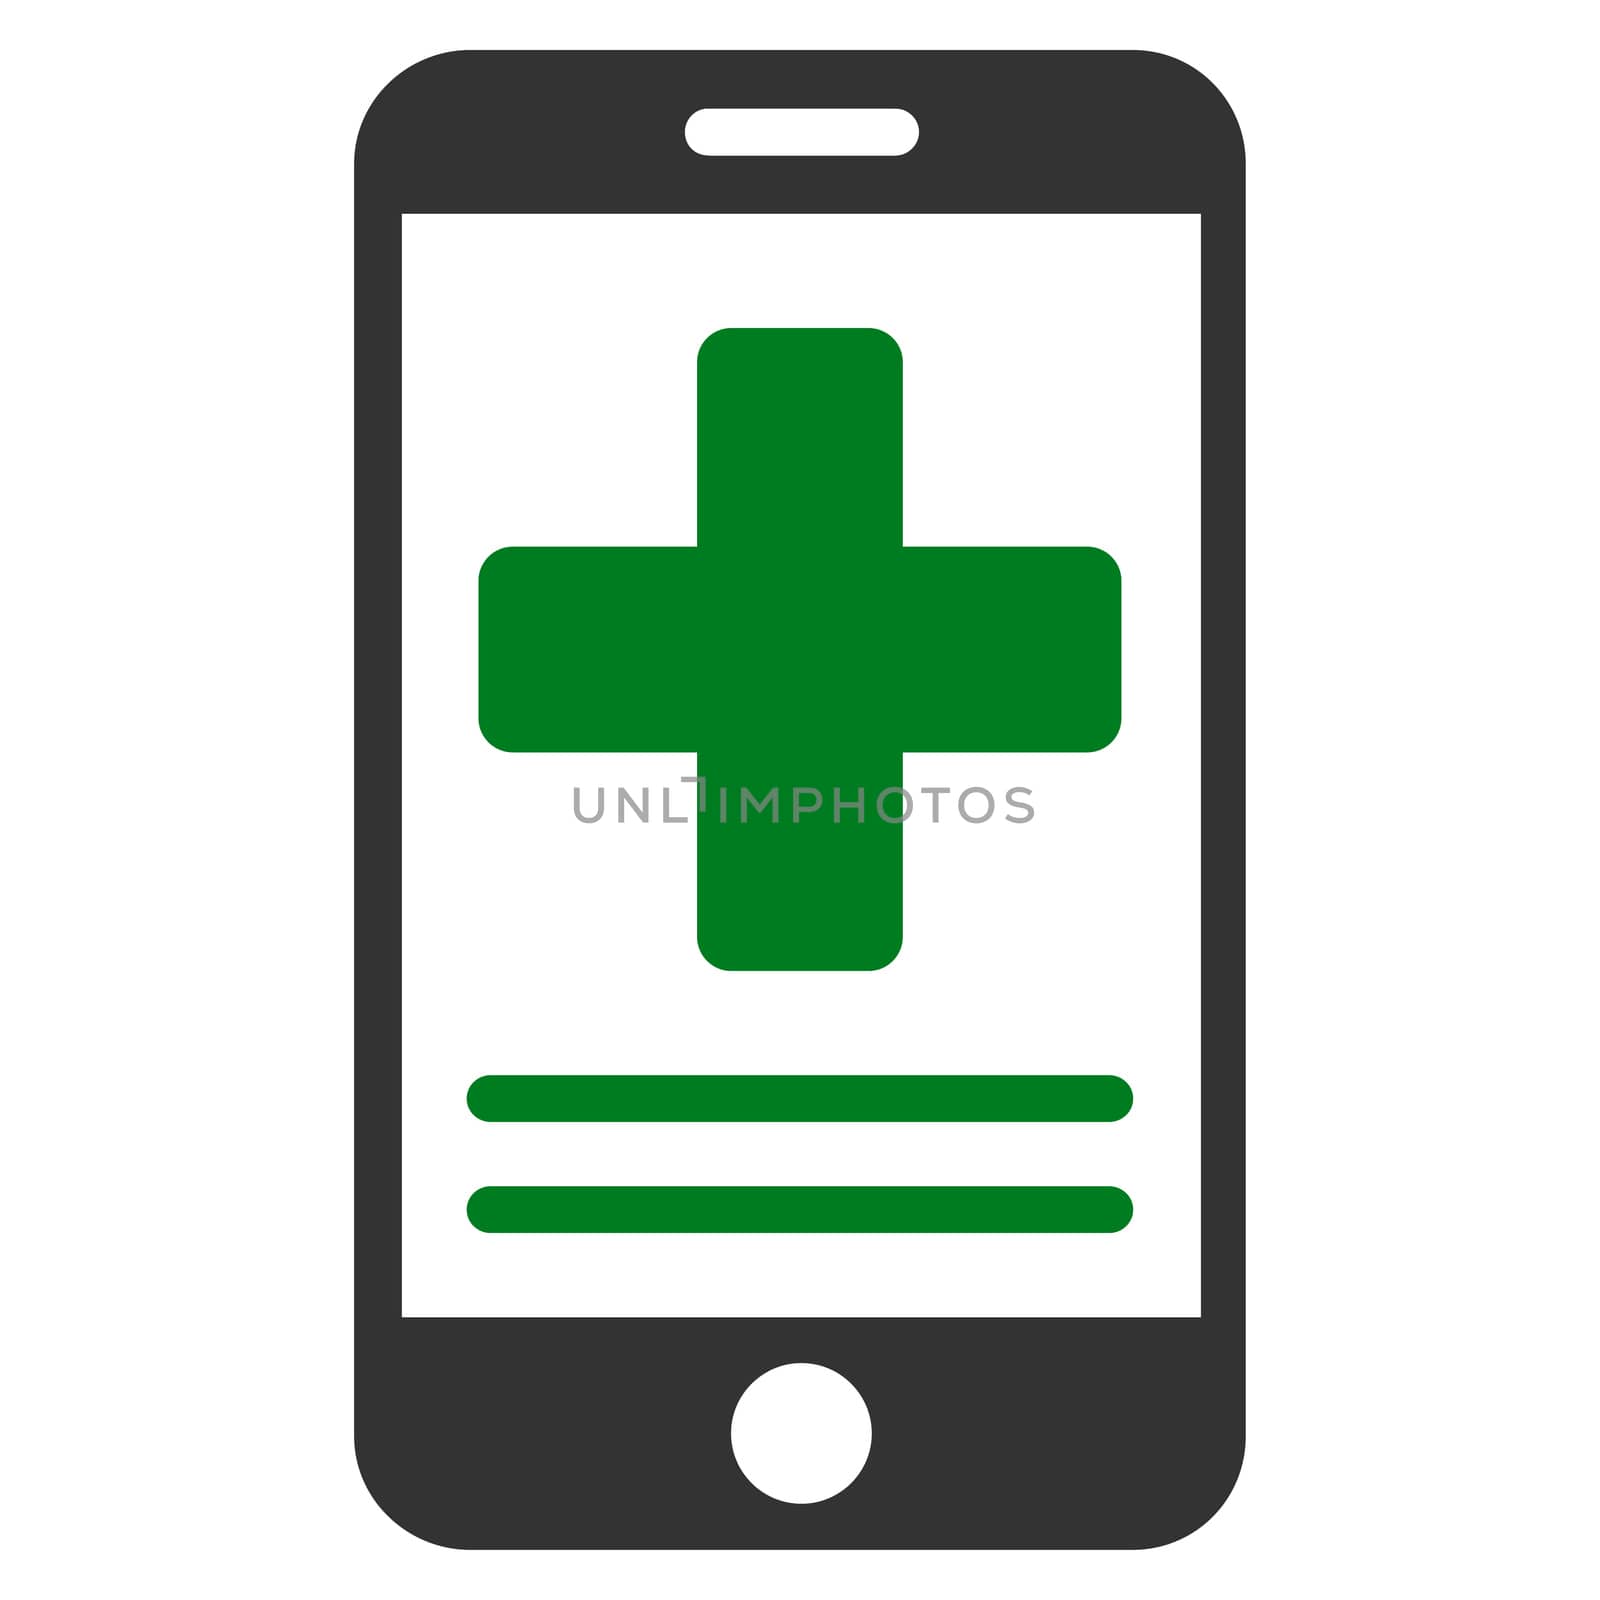 Online Medical Data raster icon. Style is bicolor flat symbol, green and gray colors, rounded angles, white background.